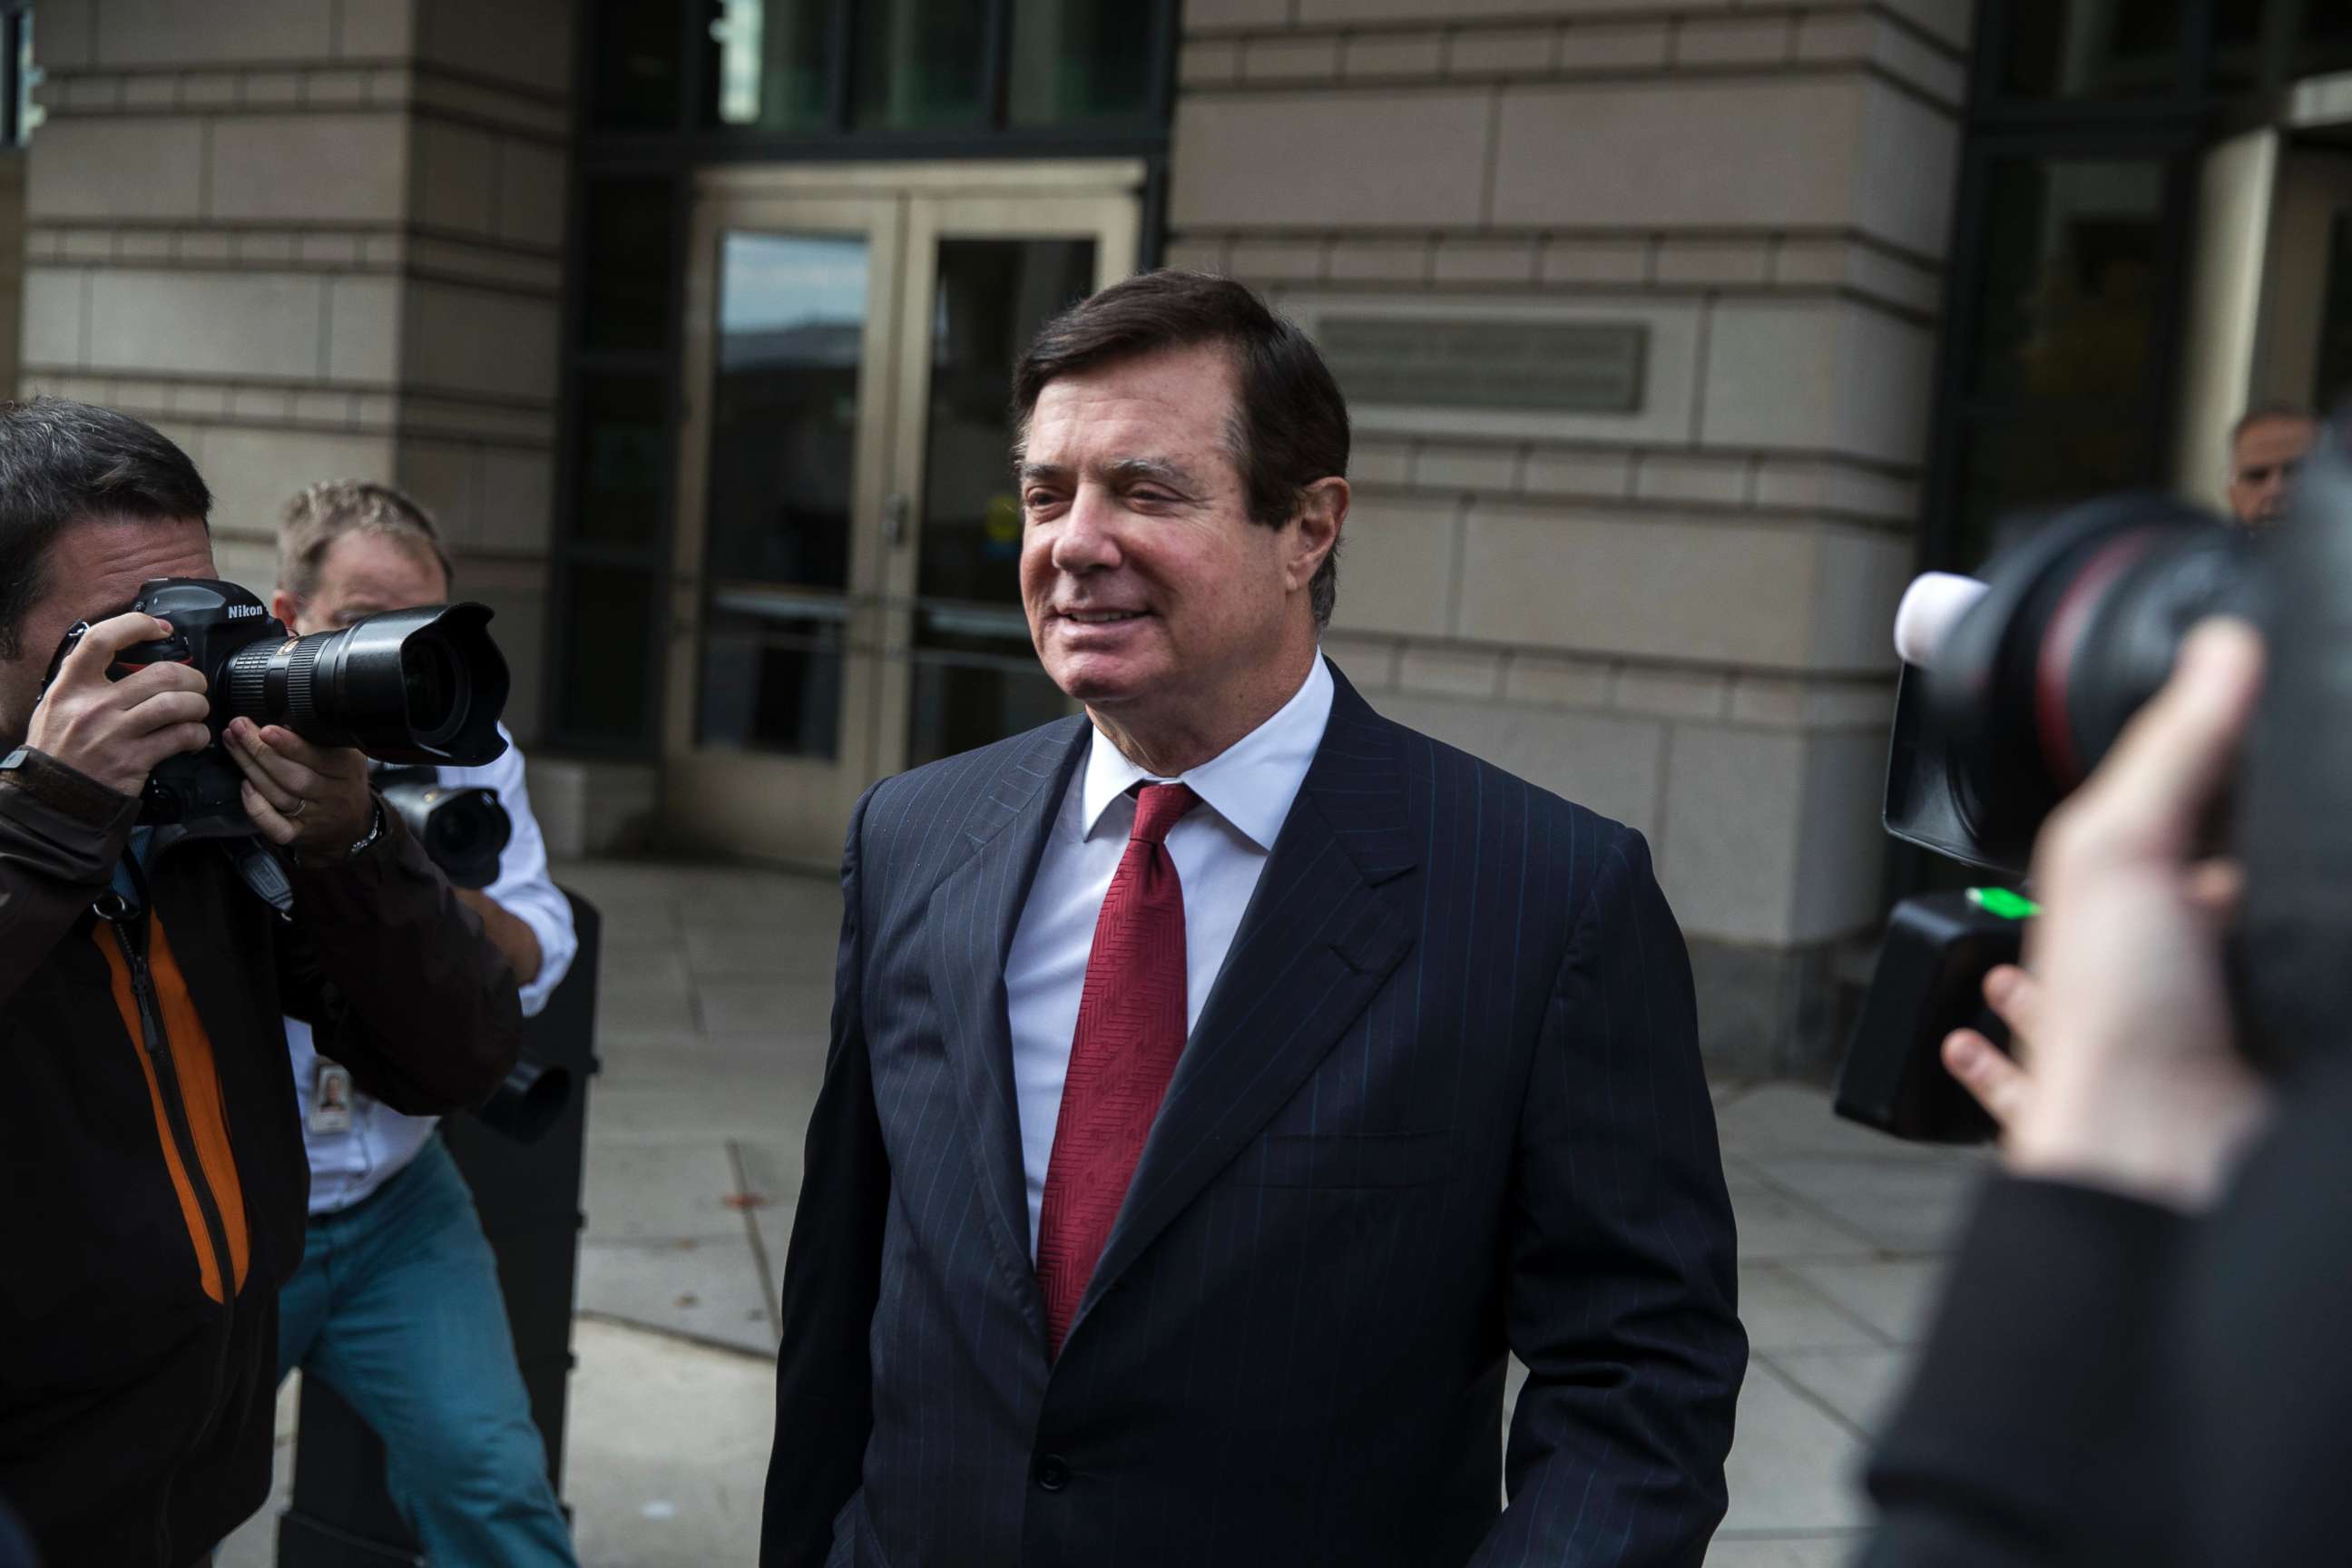 PHOTO: Former Trump Campaign Manager Paul Manafort walks to a car after a bond hearing at the E. Barrett Prettyman Federal Courthouse in Washington, Nov. 6,  2017.